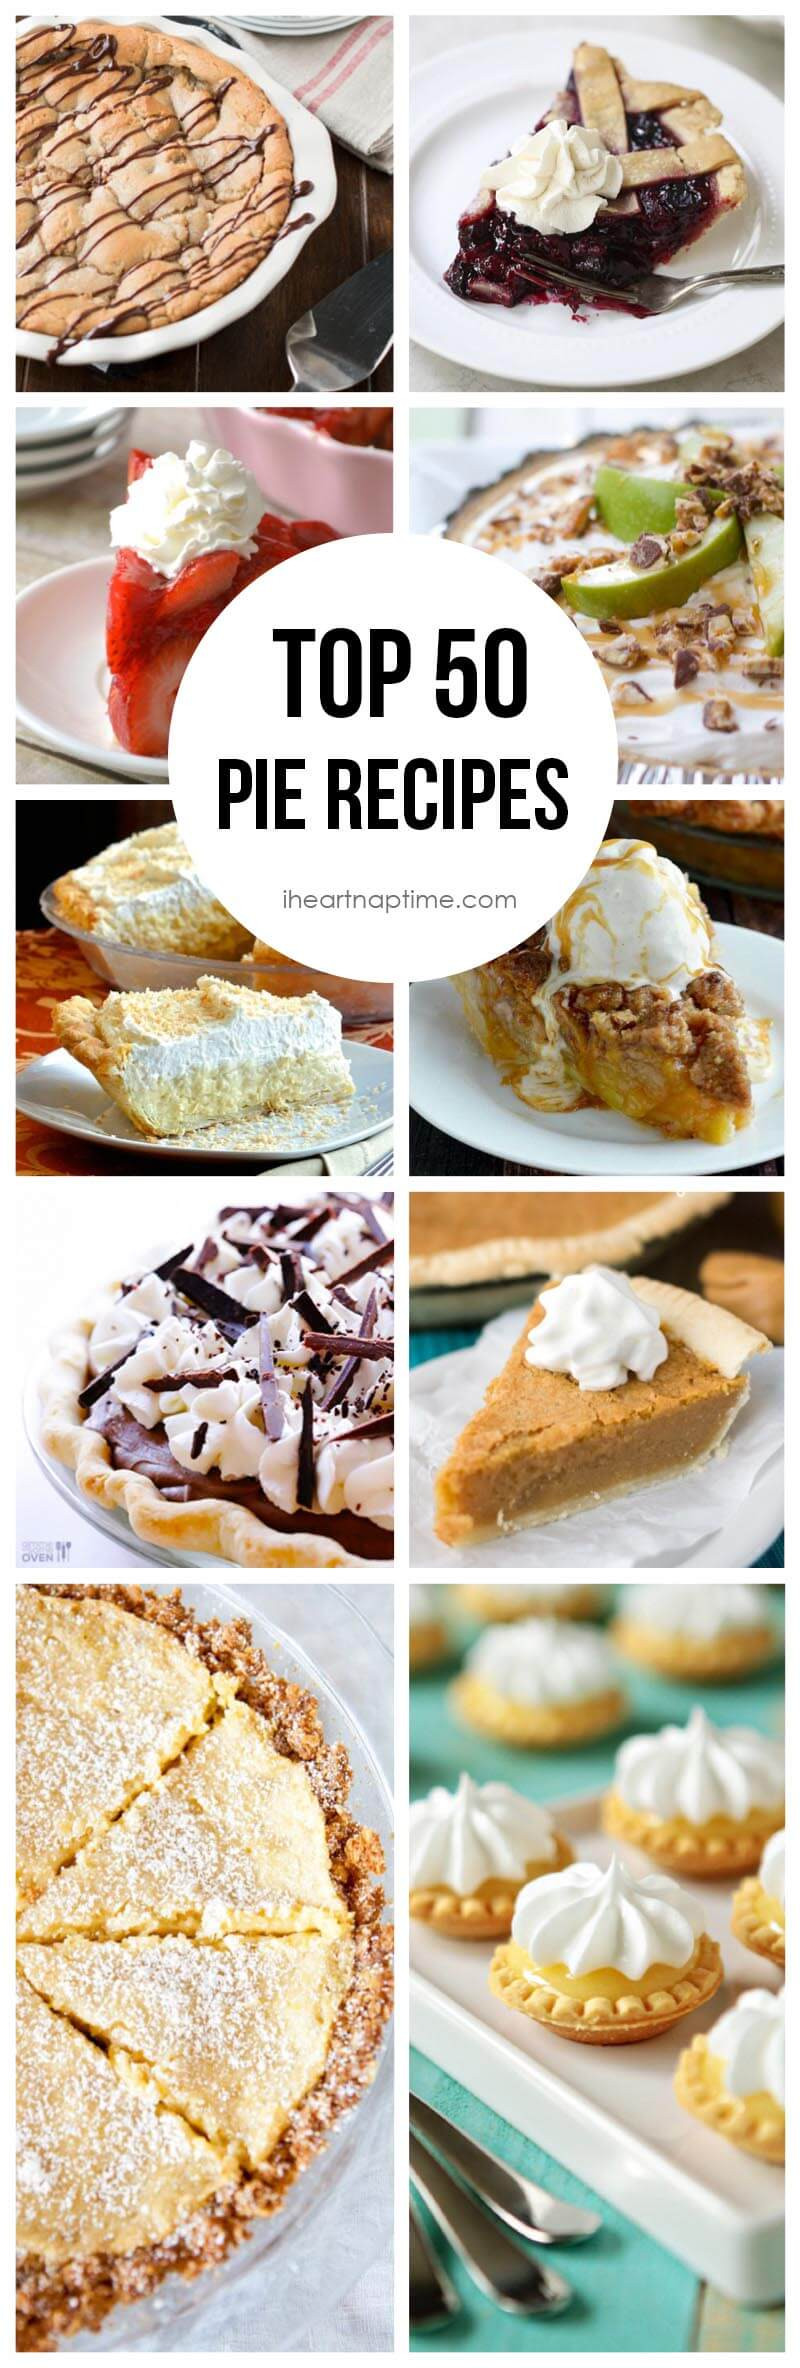 Best Thanksgiving Pie Recipes
 Top 50 Pie Recipes I Heart Nap Time